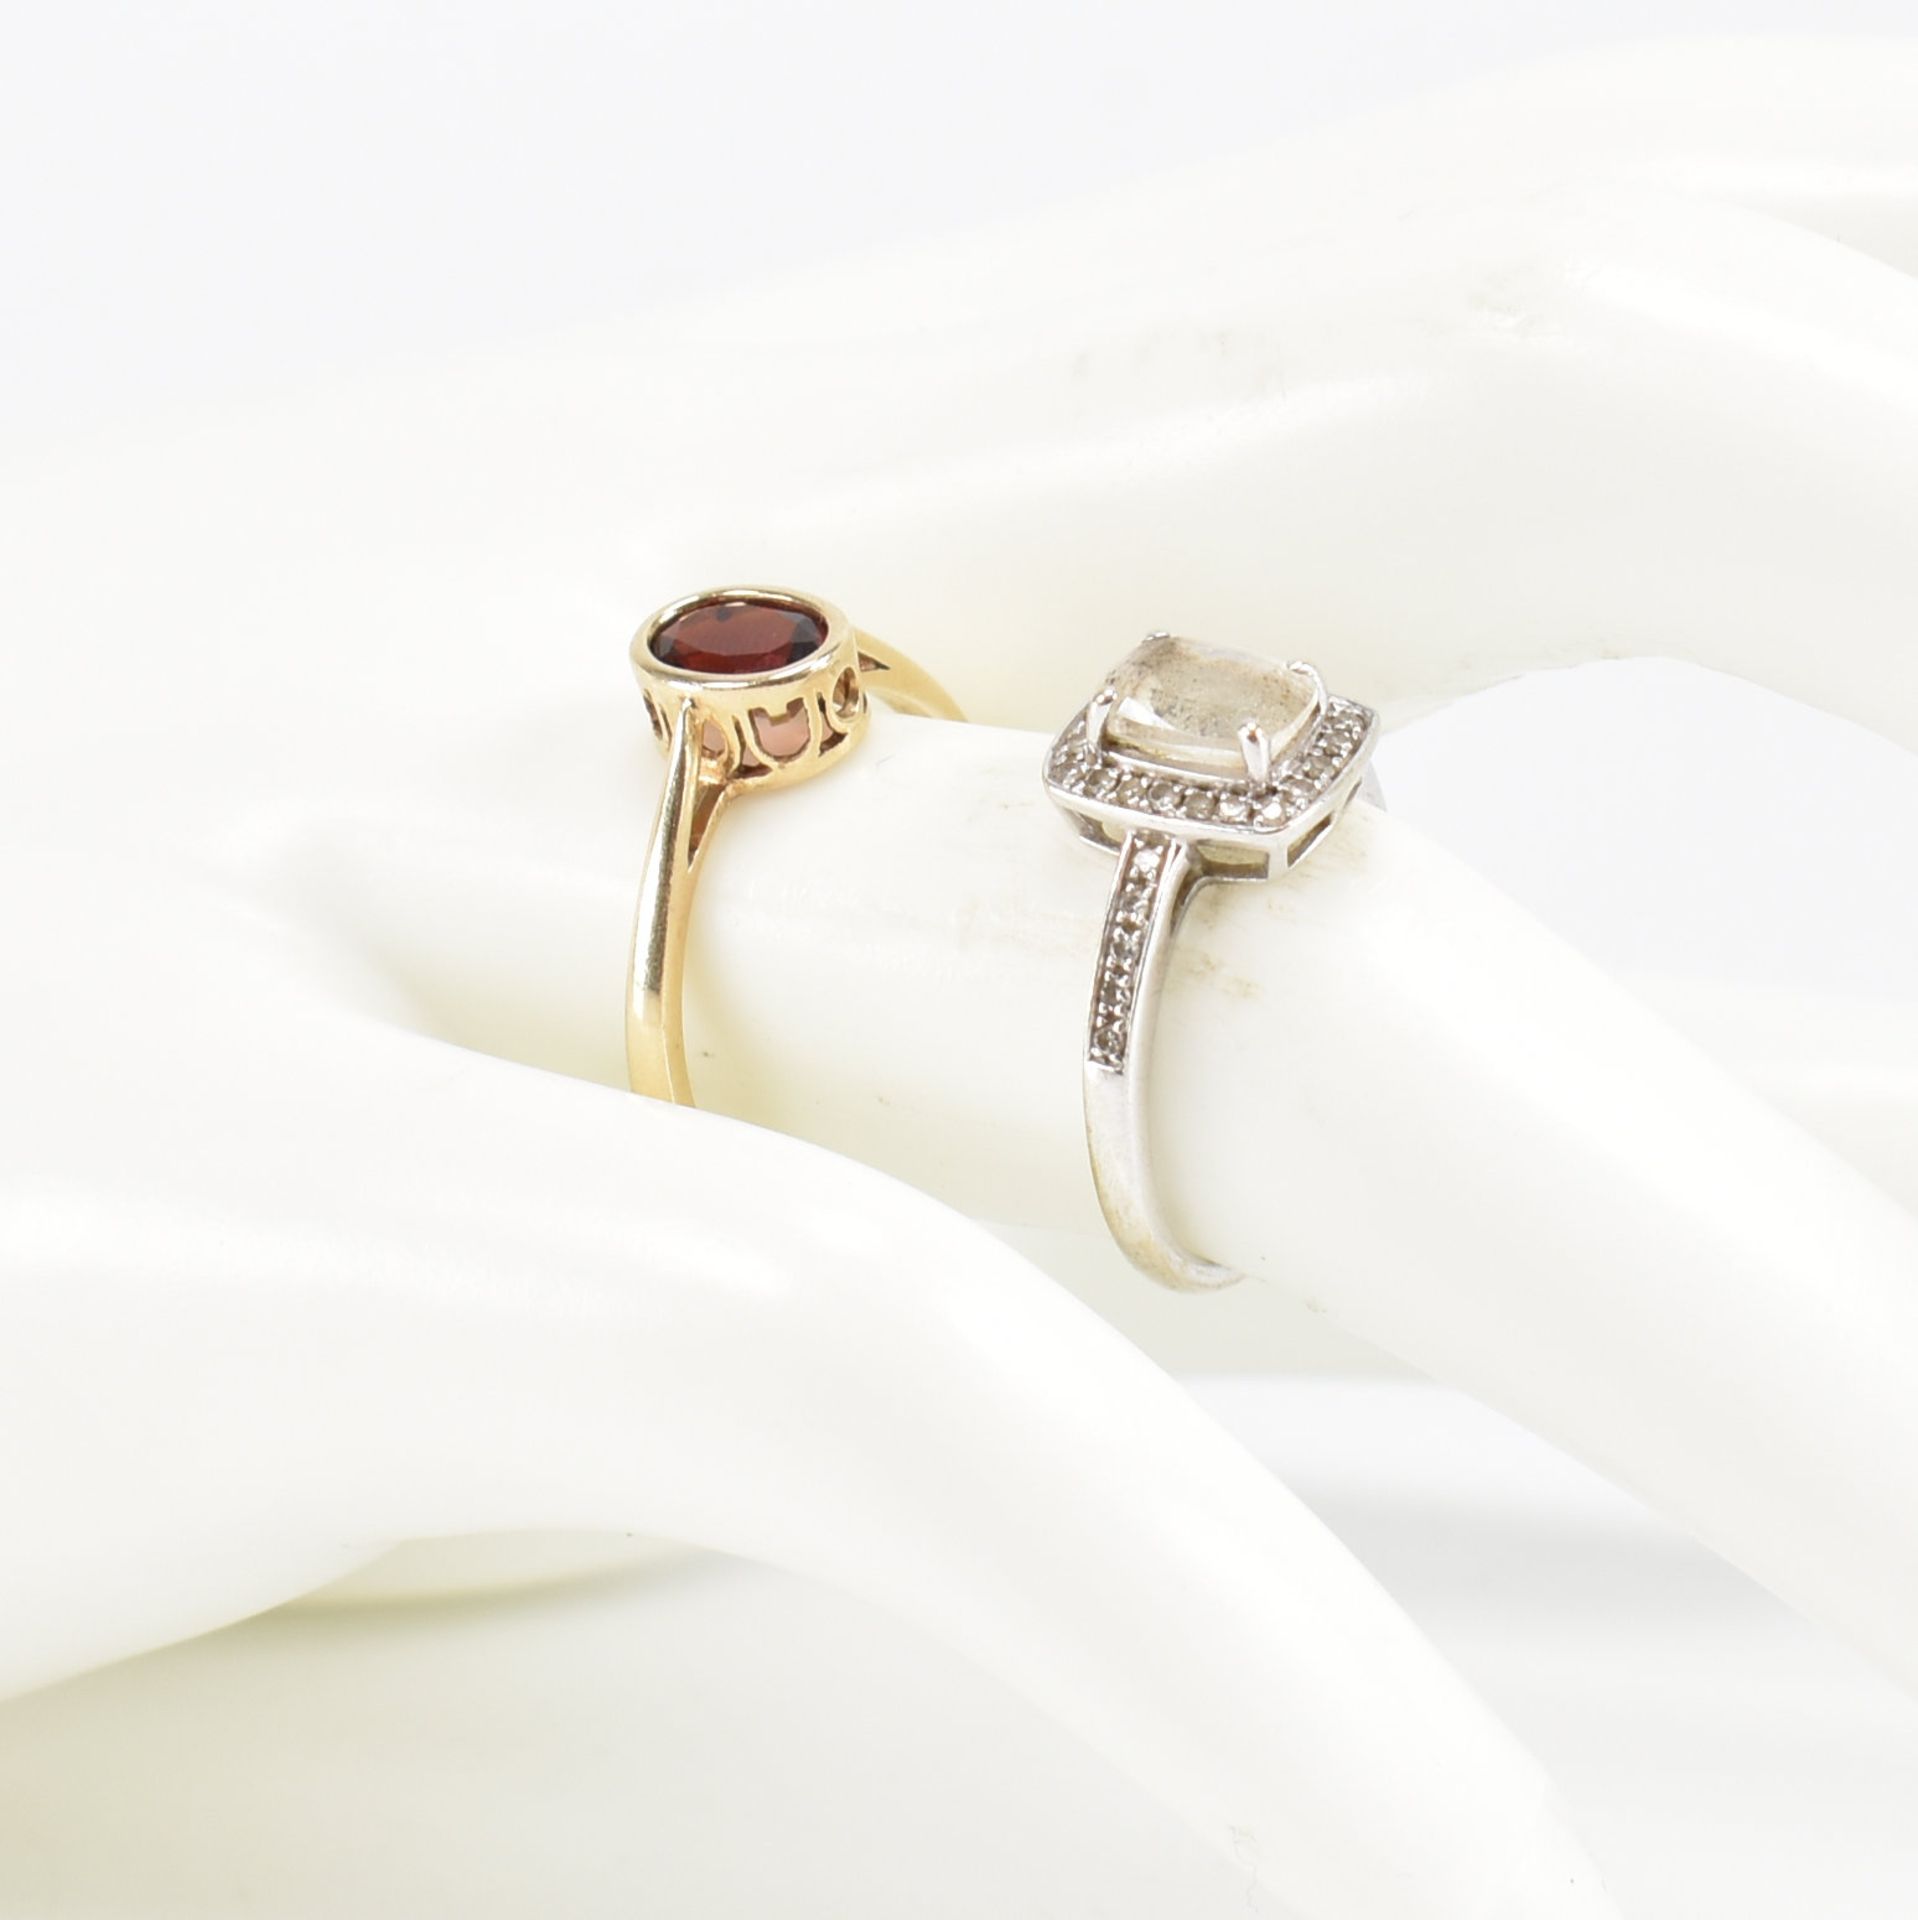 TWO HALLMARKED 9CT GOLD STONE SET RINGS - Image 8 of 8